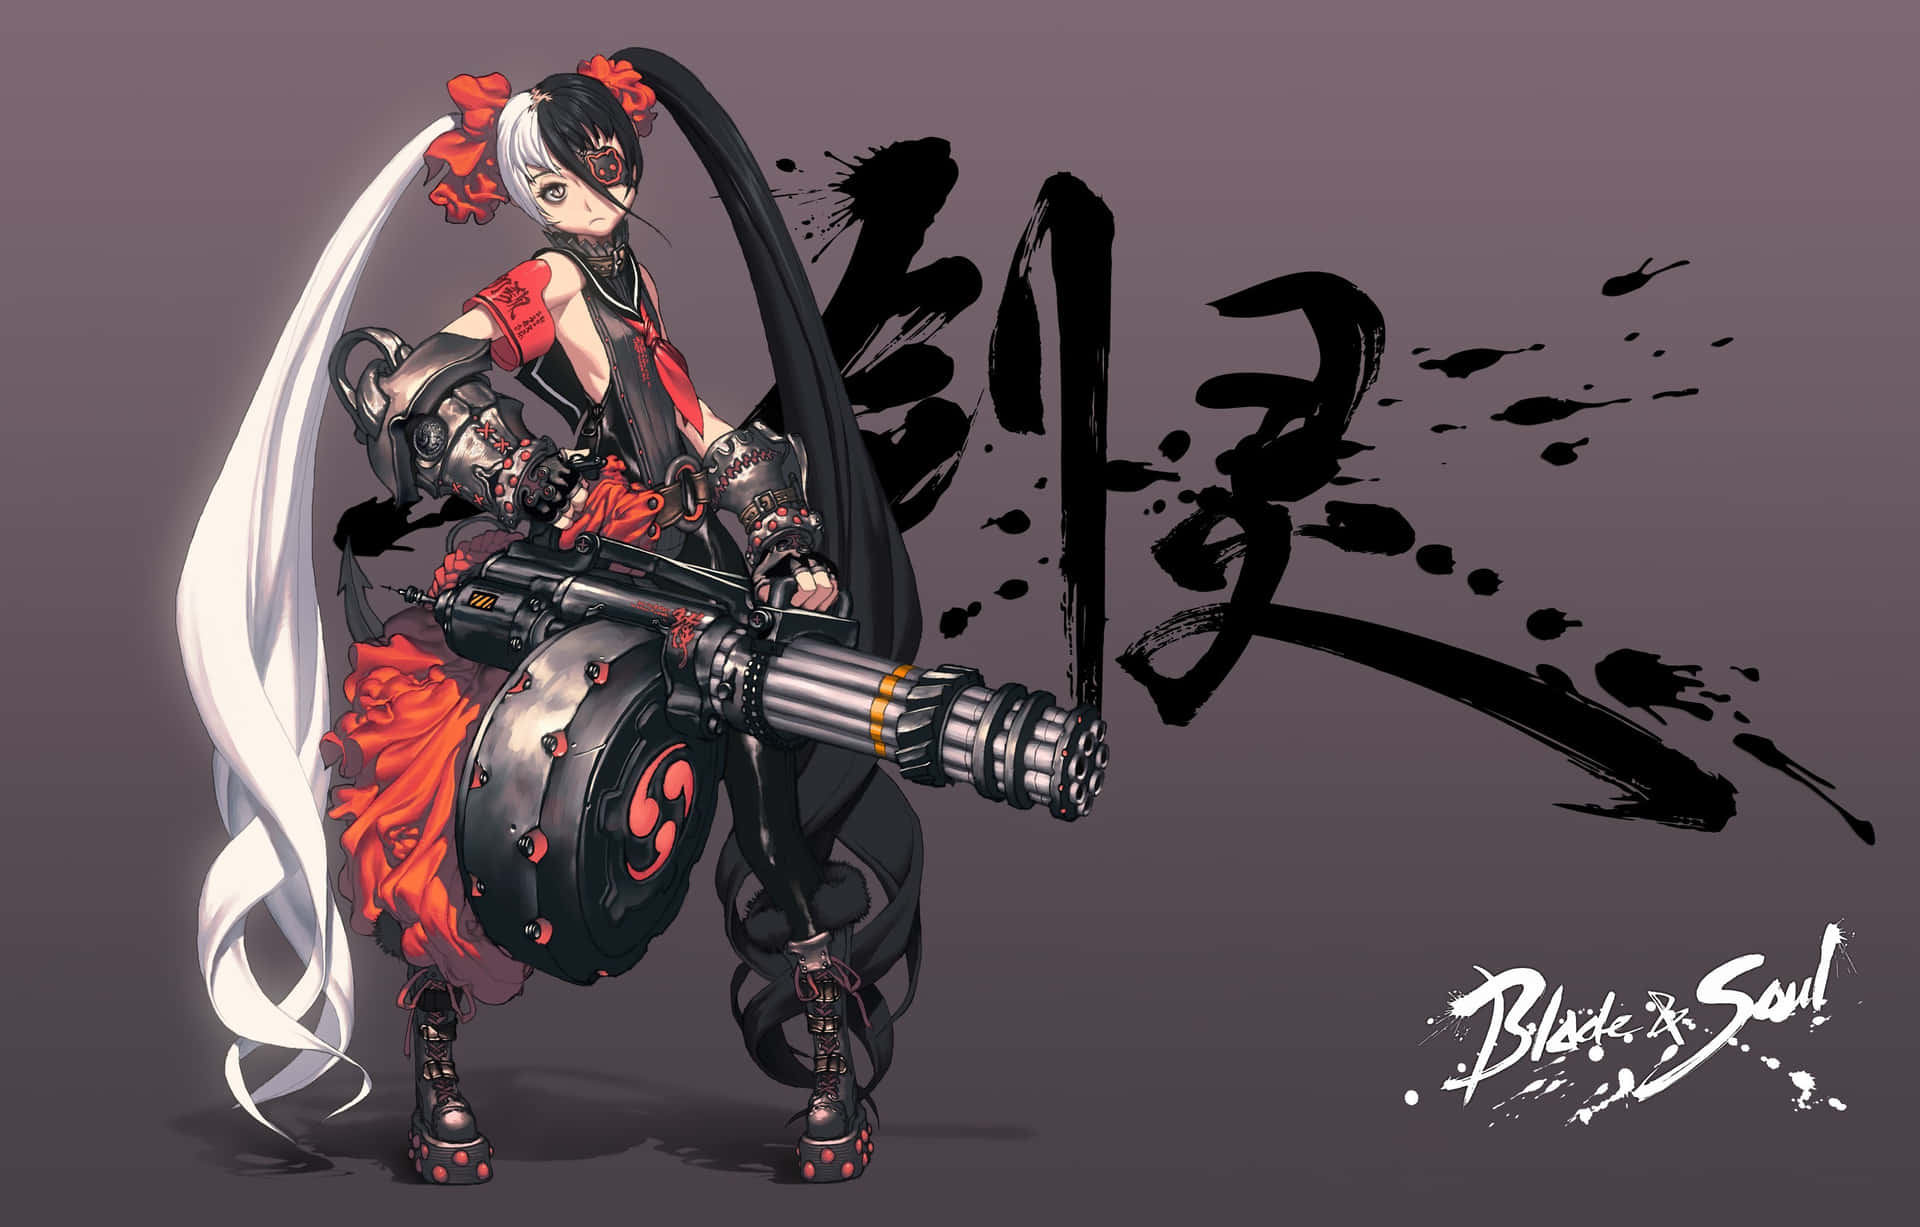 A Girl With A Gun And Chinese Writing Wallpaper